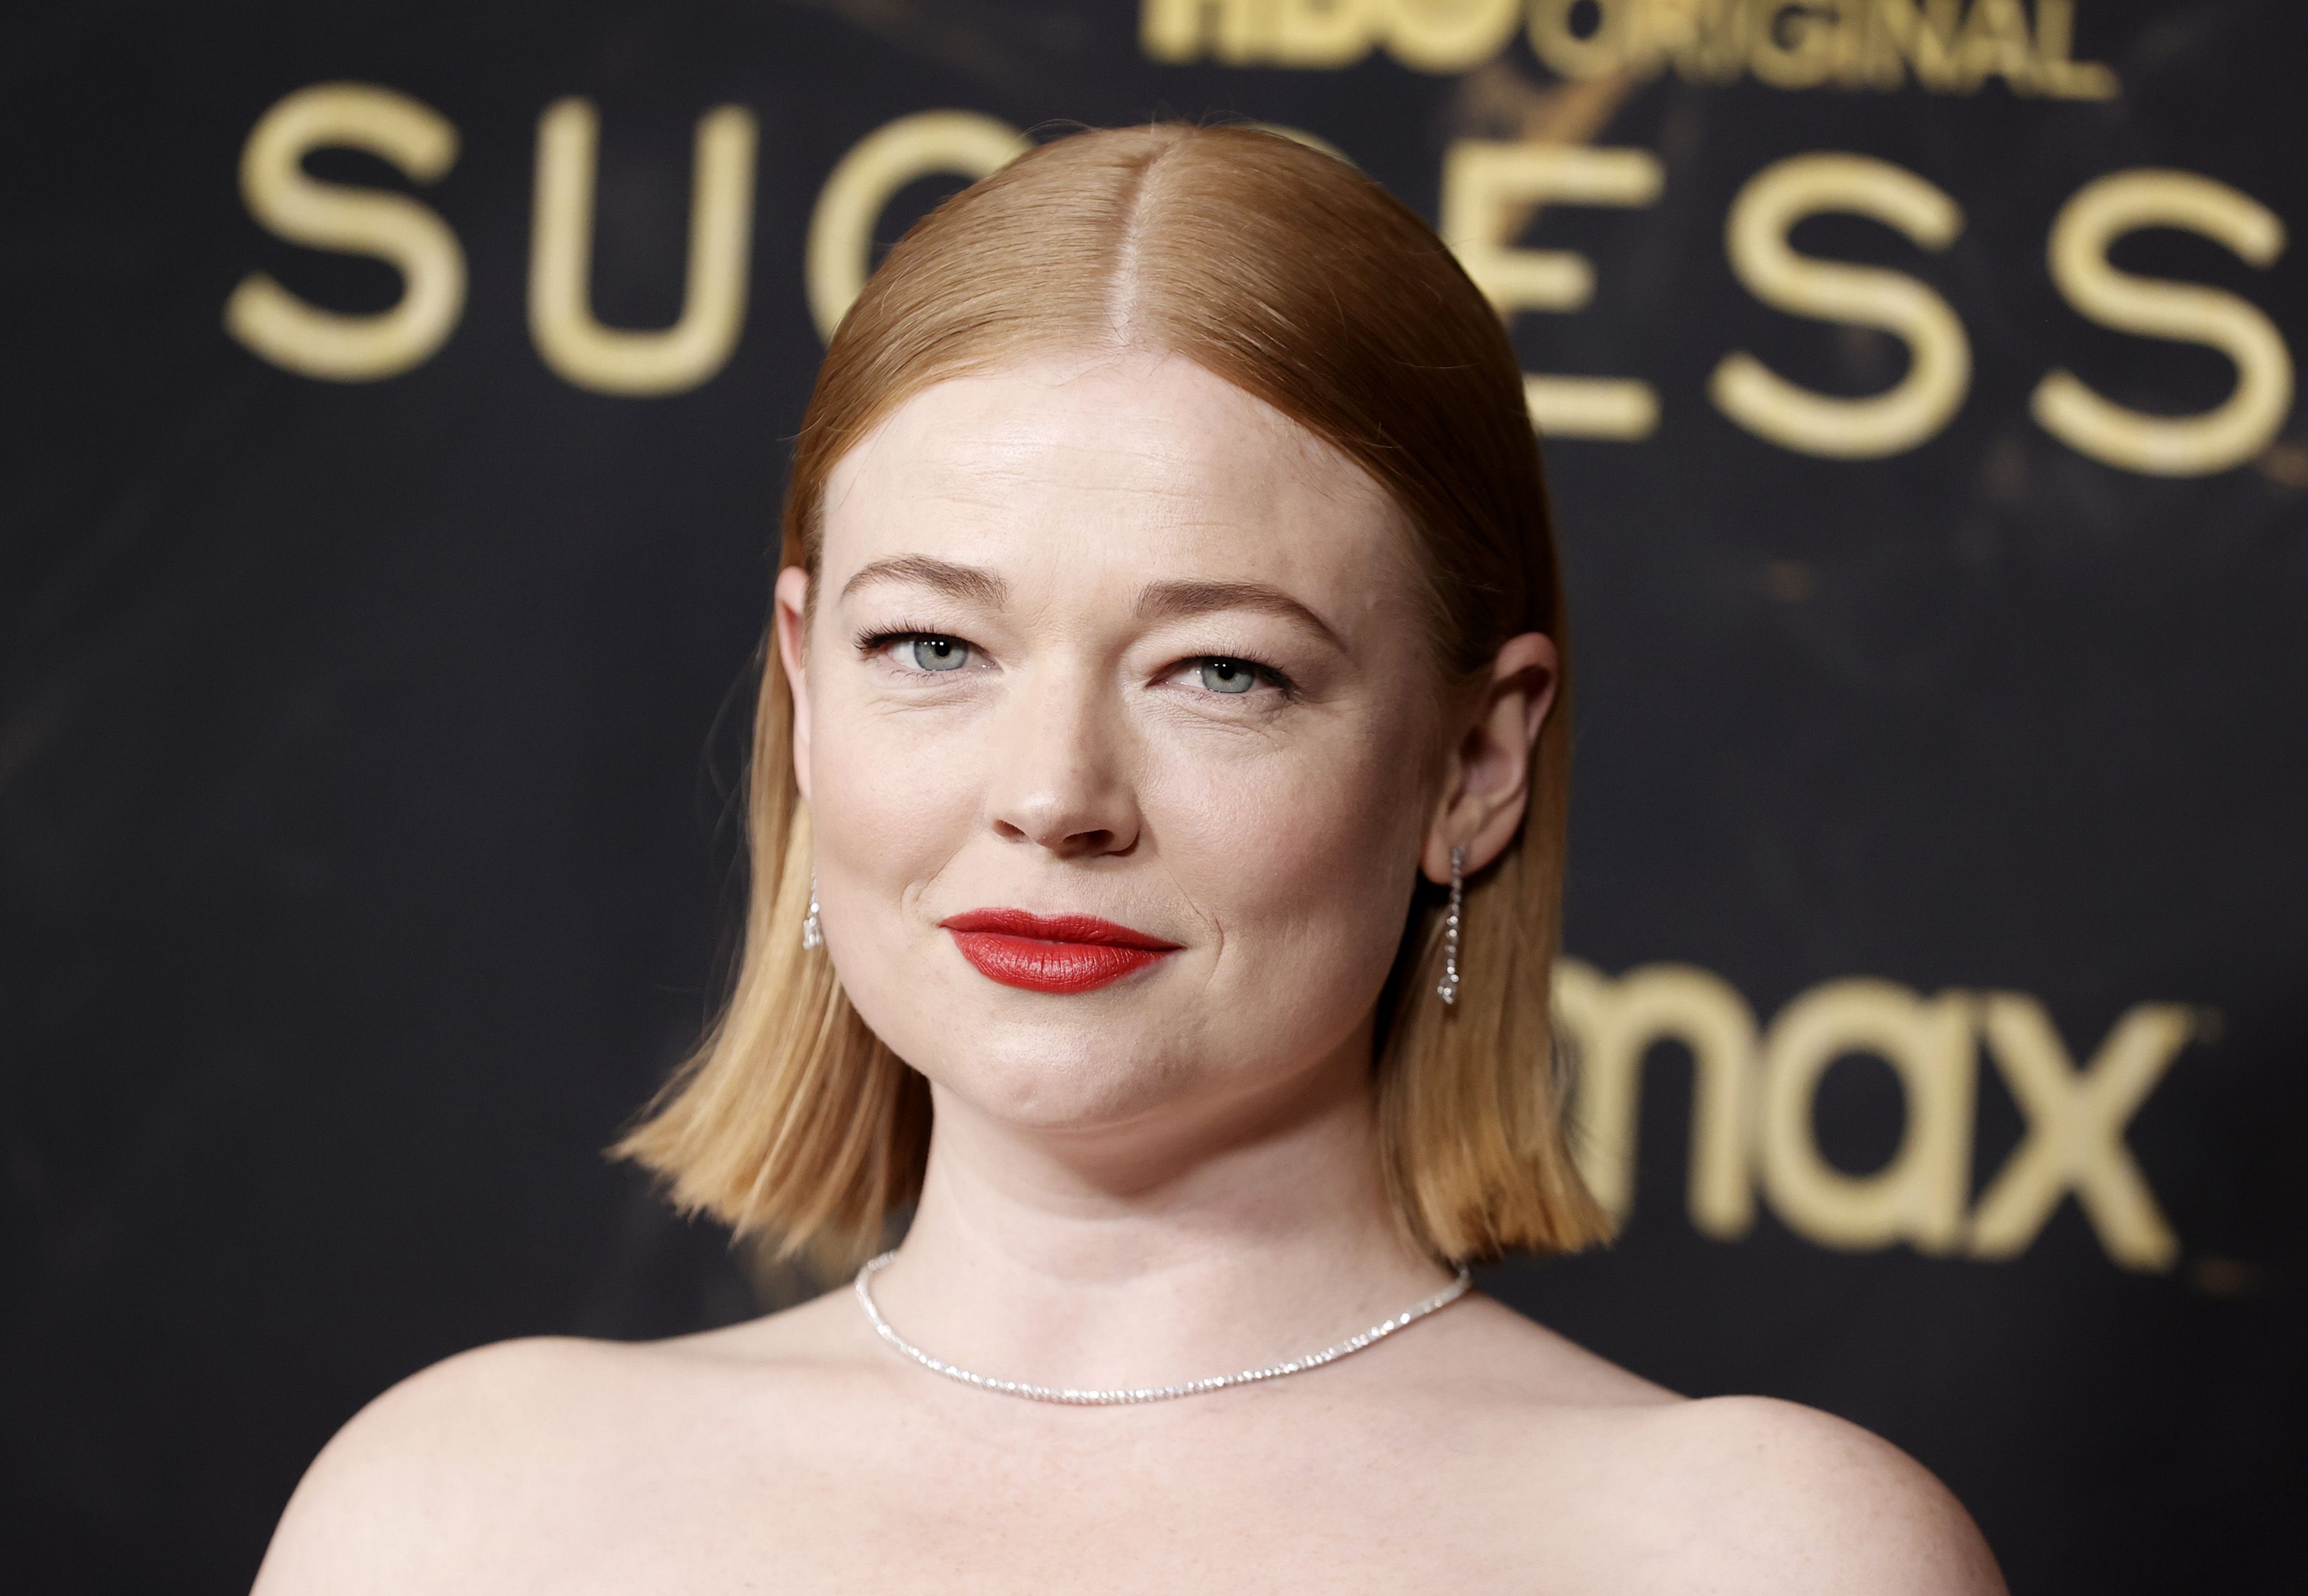 Succession's Sarah Snook on season 3 and the show's future